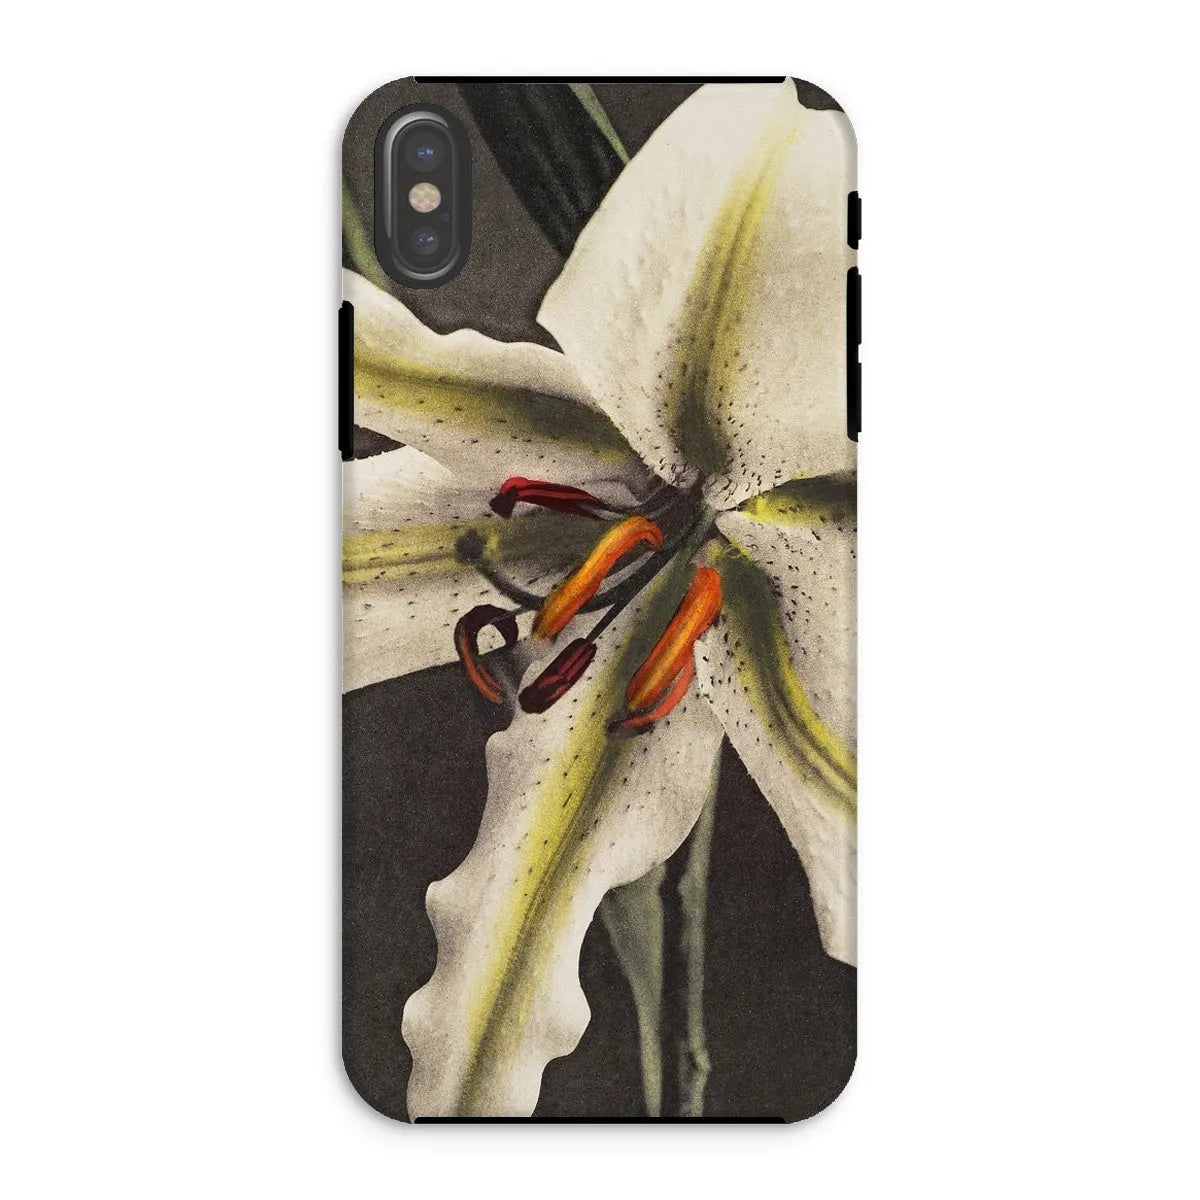 Lily By Kazumasa Ogawa Art Phone Case - Iphone Xs / Matte - Mobile Phone Cases - Aesthetic Art